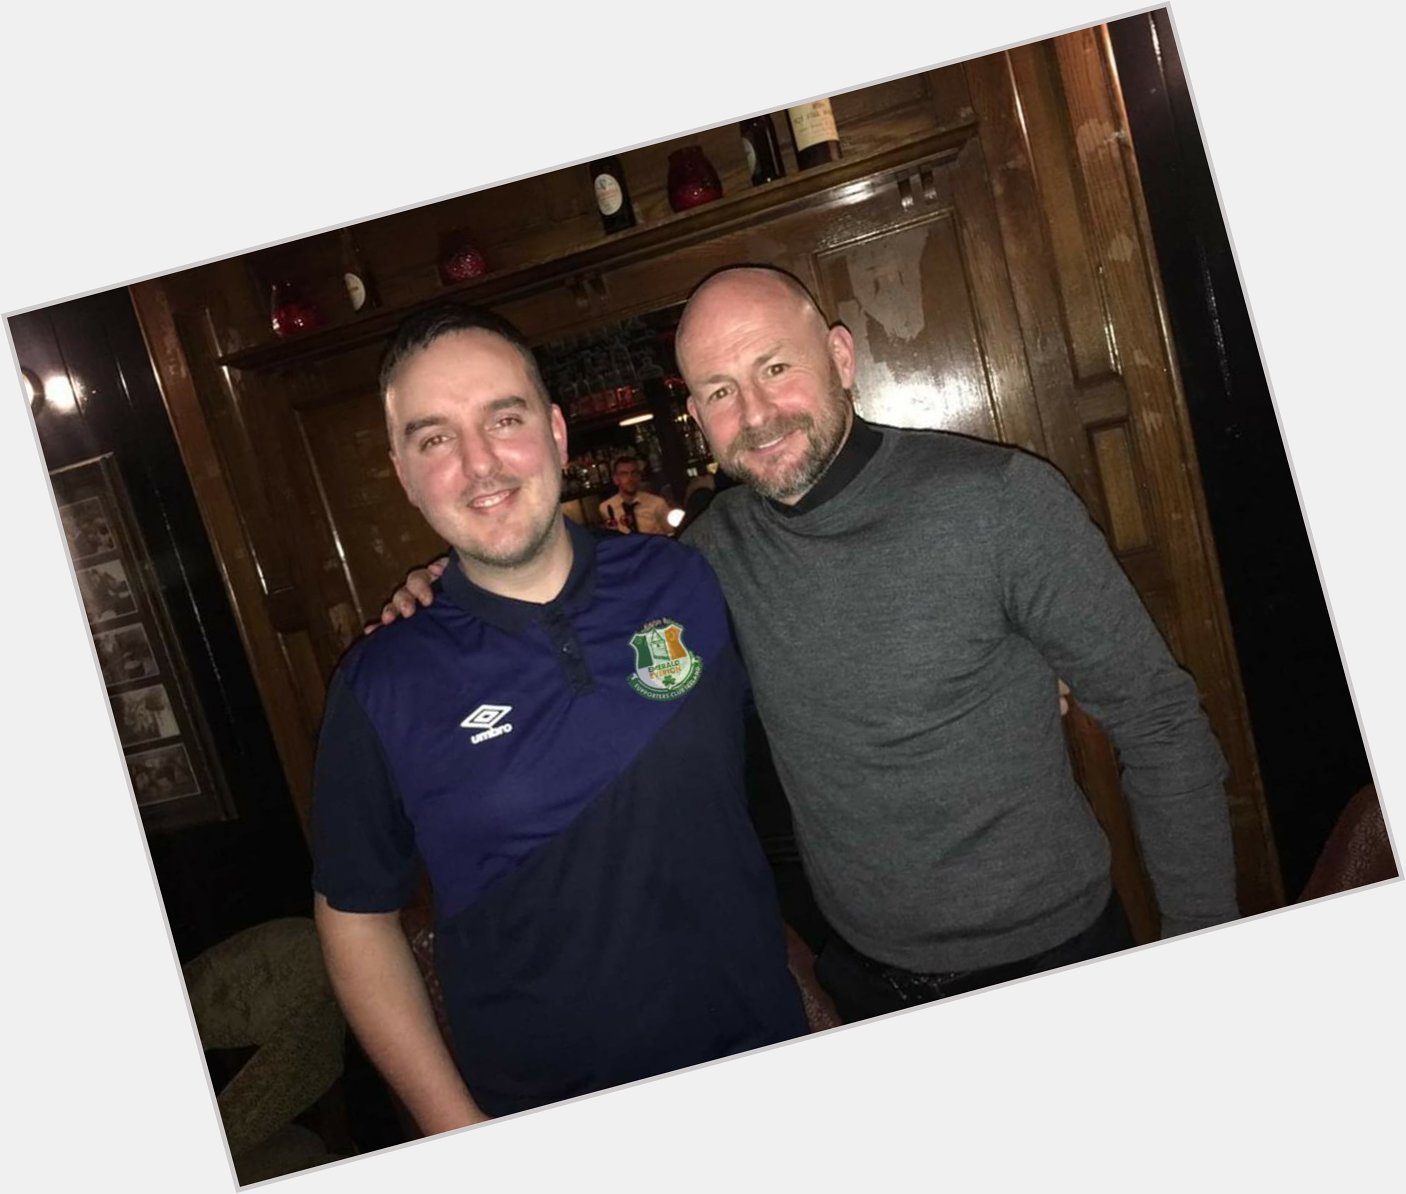 Happy Birthday to super Lee Carsley hope you had a great day and hope to see you in Dublin again soon. 